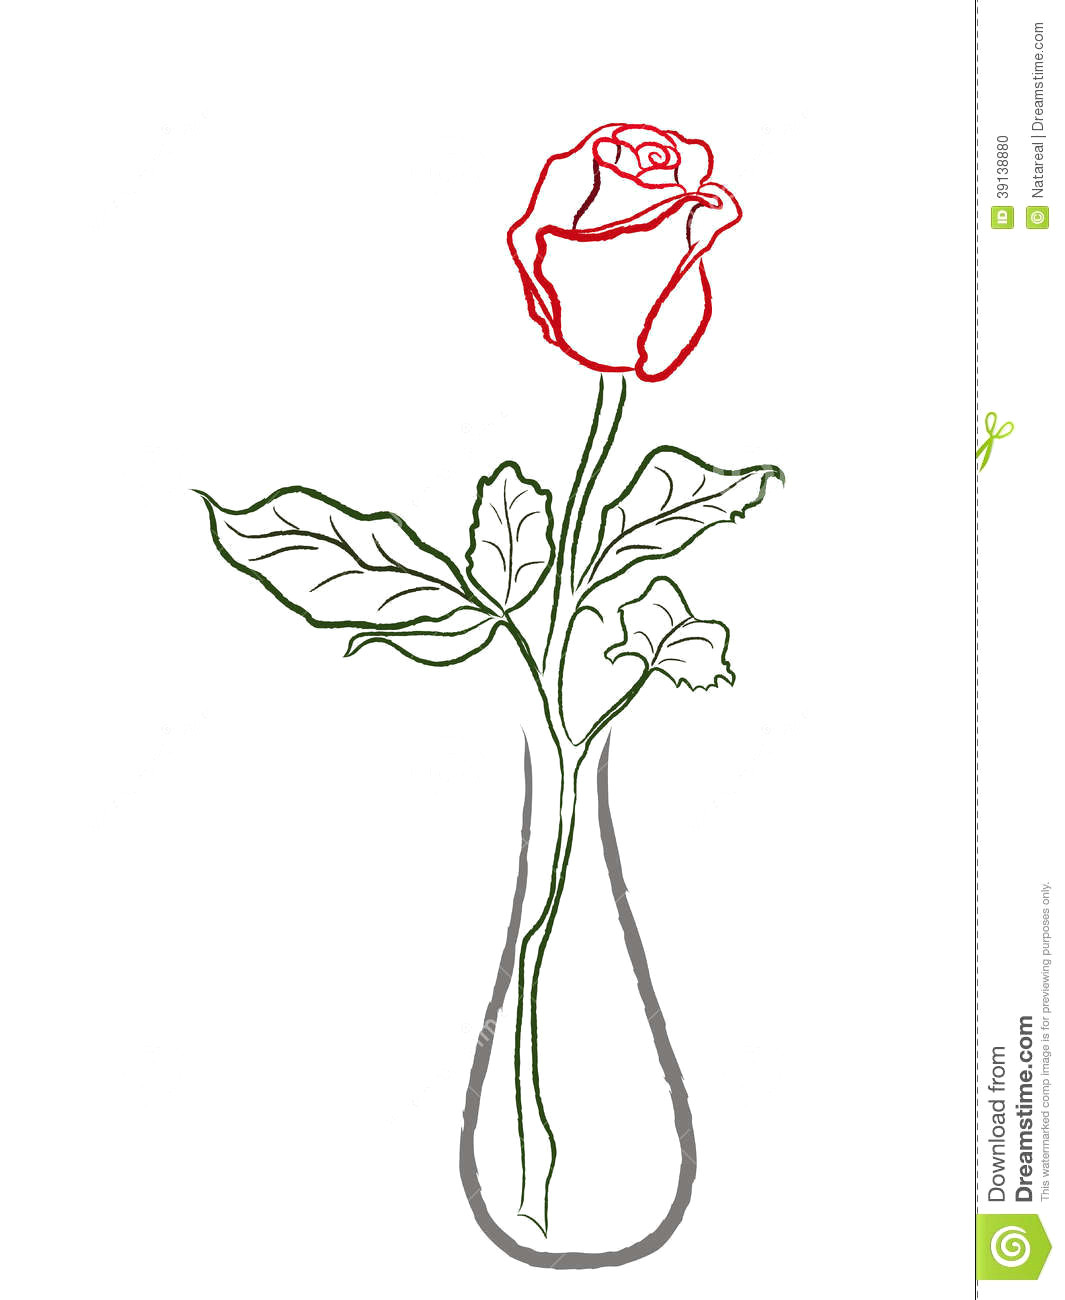 Drawing A Red Rose Roses Pictures to Draw New Drawn Vase Red Rose 3h Vases How to Draw